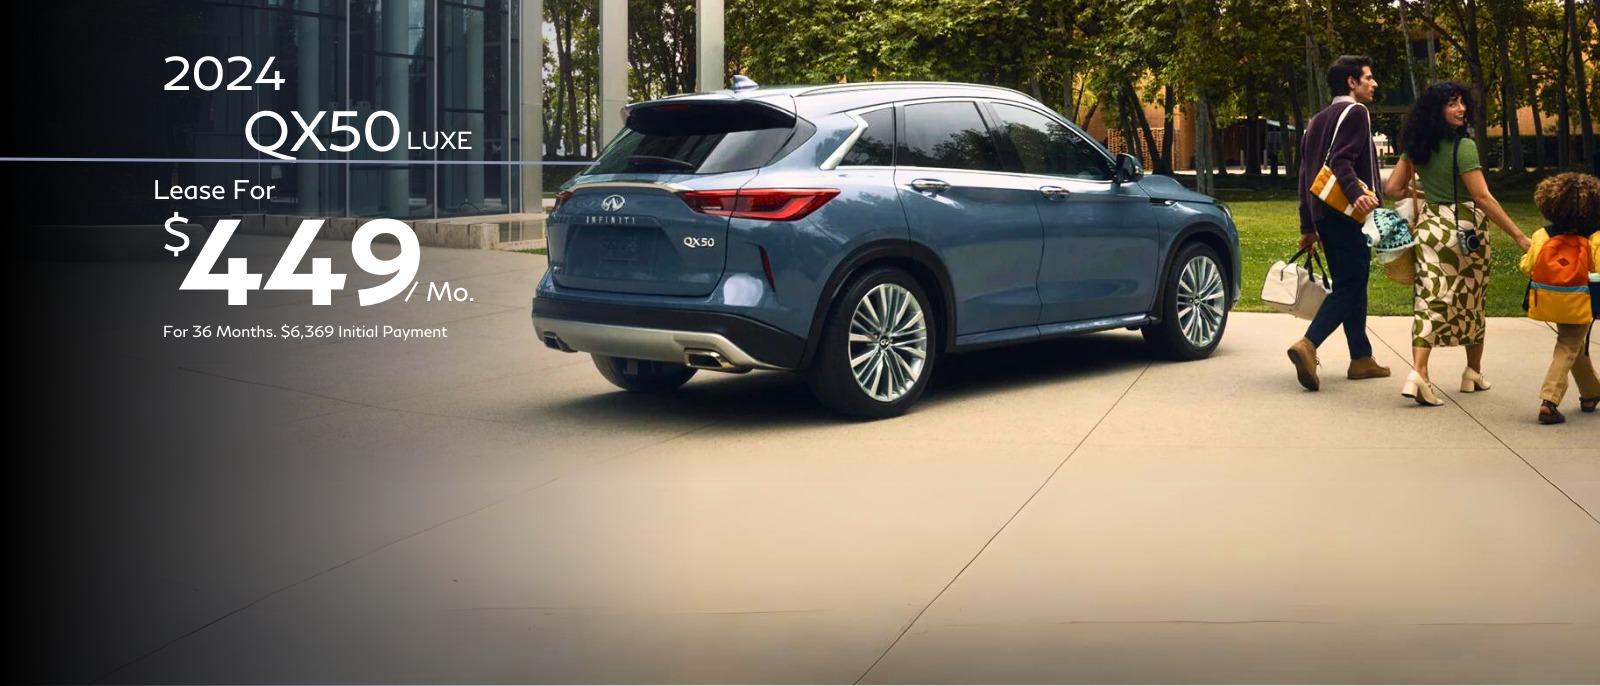 2024 QX50 Luxe  Lease 36 Months - $449/Month - $6,369 initial payment.